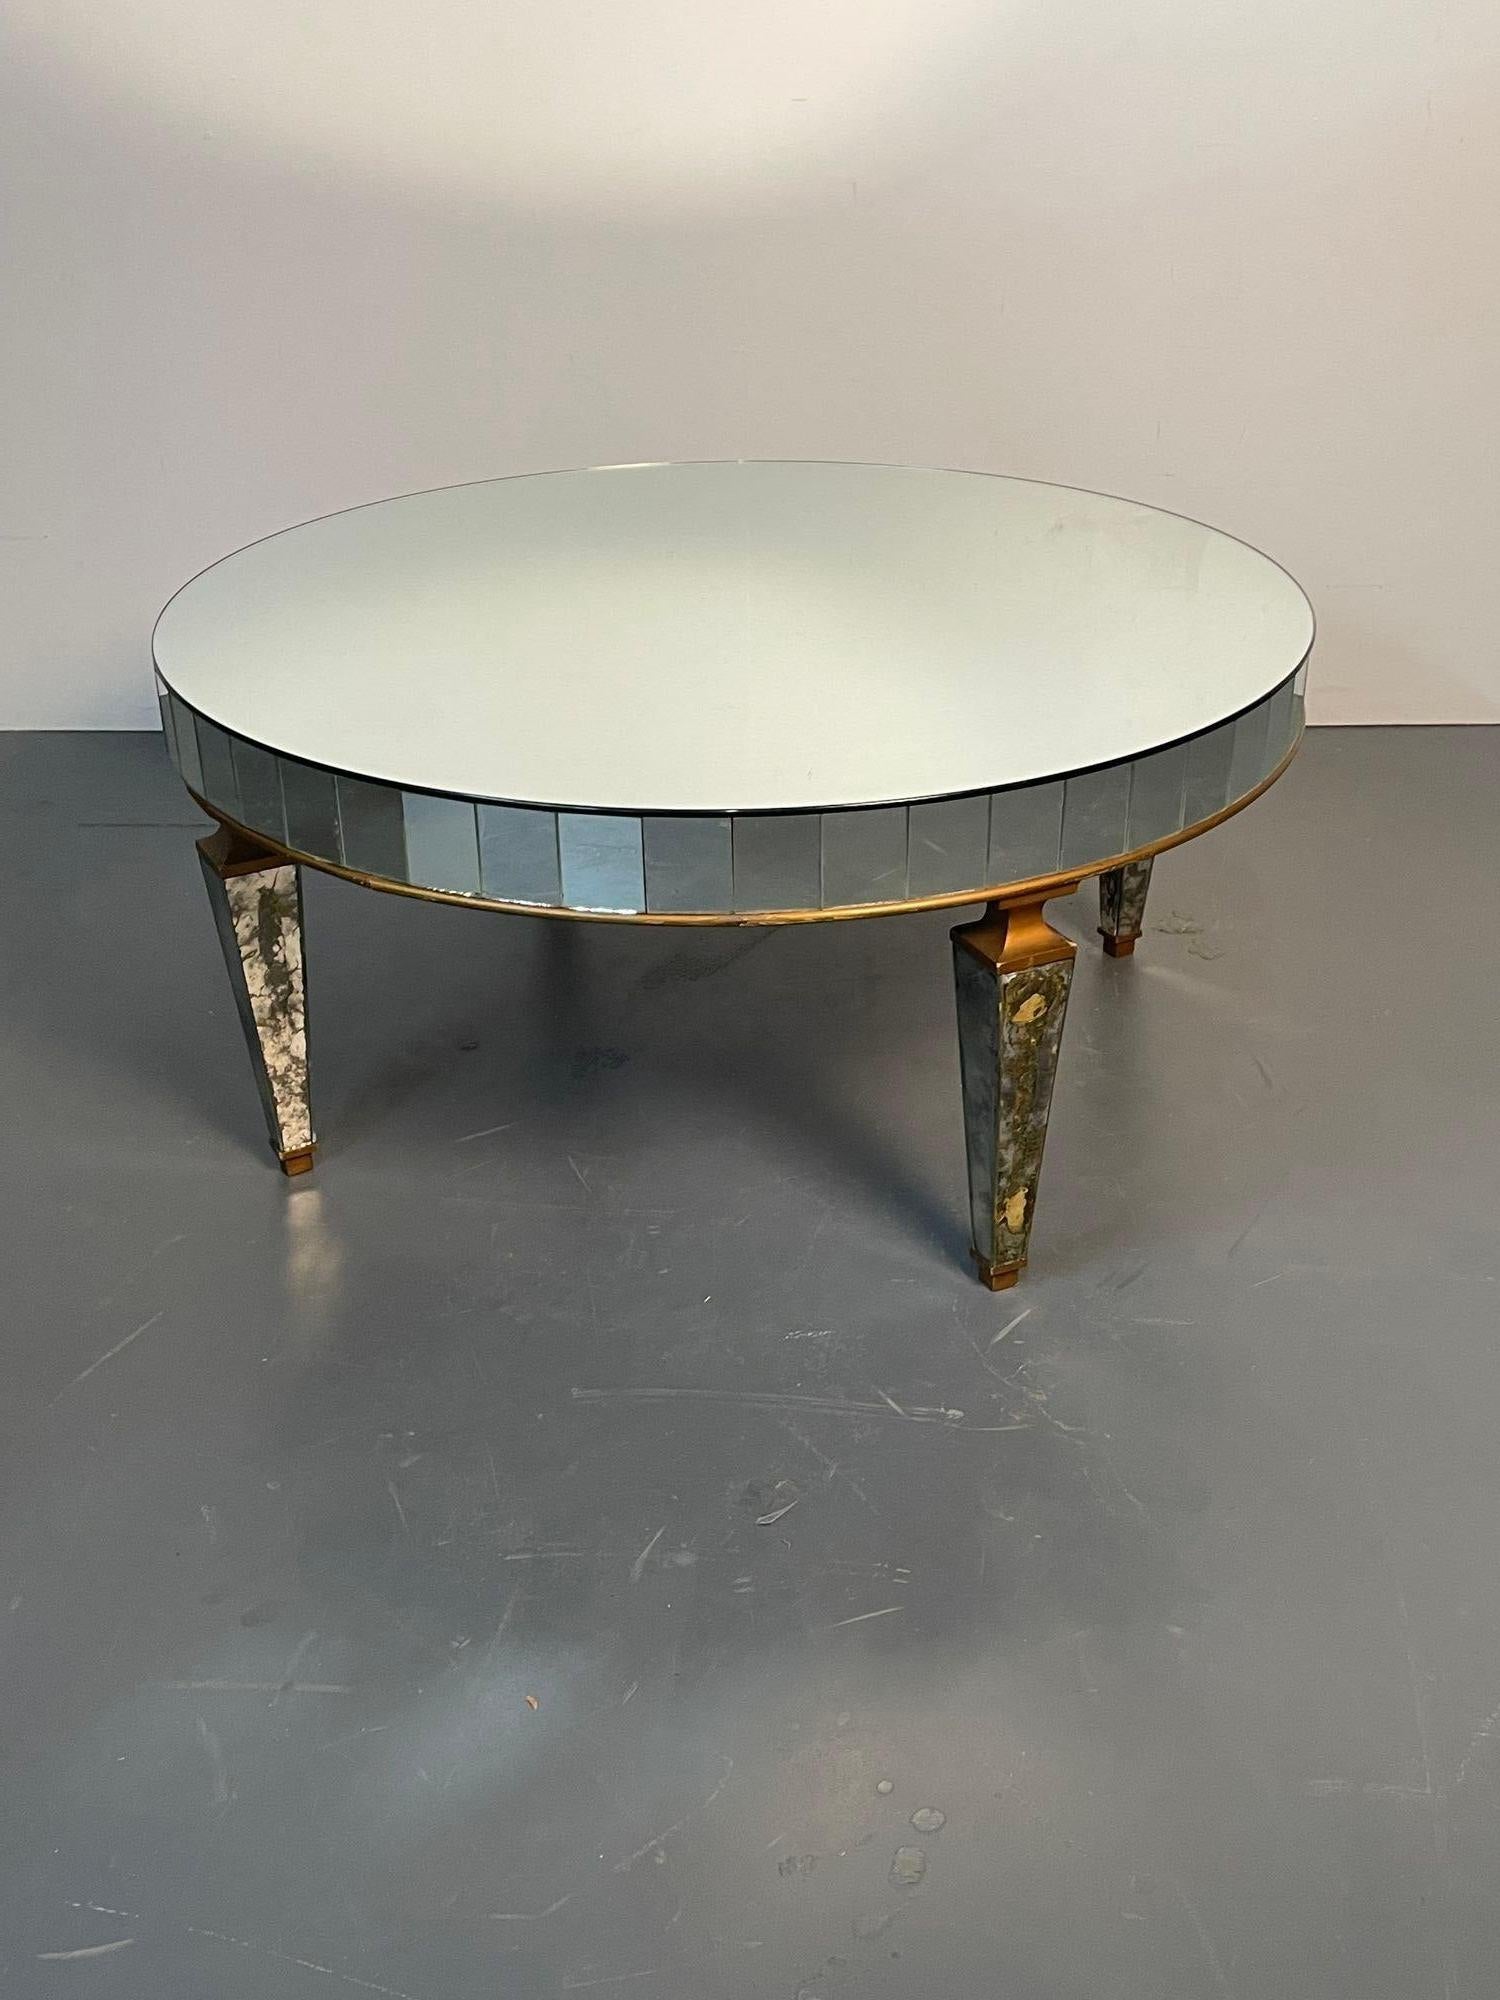 Art Deco style distressed mirrored circular coffee / cocktail / low table.
A sleek and stylish coffee or cocktail table of circular form. Having mirrored legs on all sides frames in a gilt wood border with matching top. The apron of micromosaic